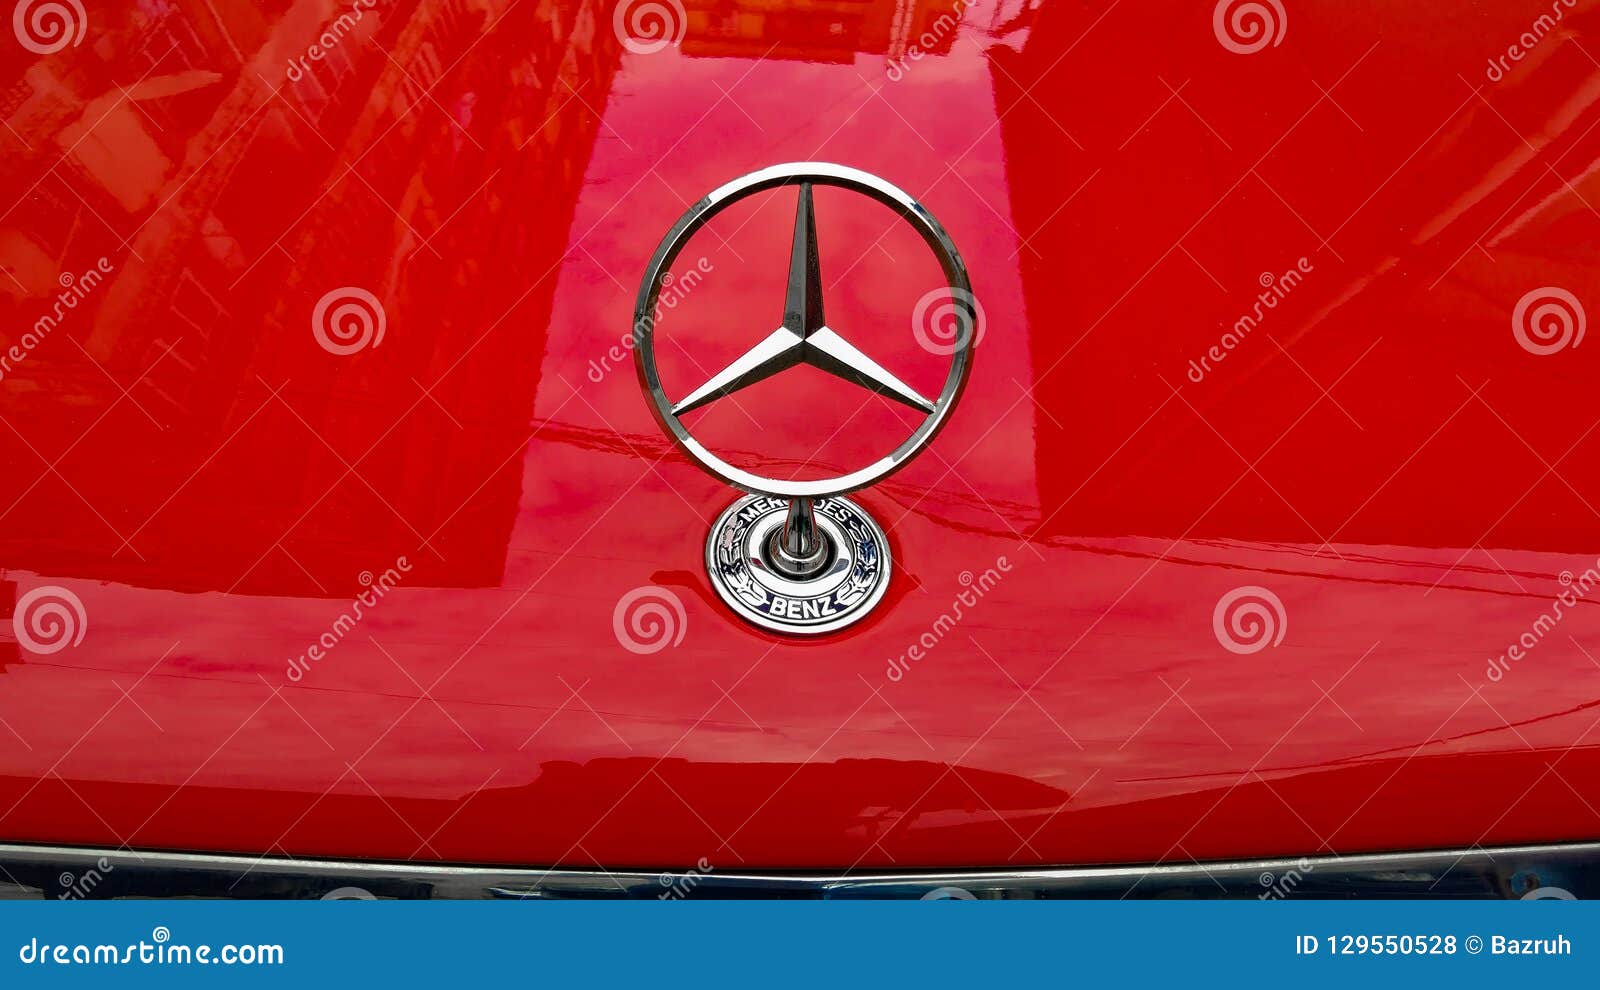 Mercedes Benz Logo on Red Car Hood Editorial Stock Photo - Image of german,  germany: 129550528